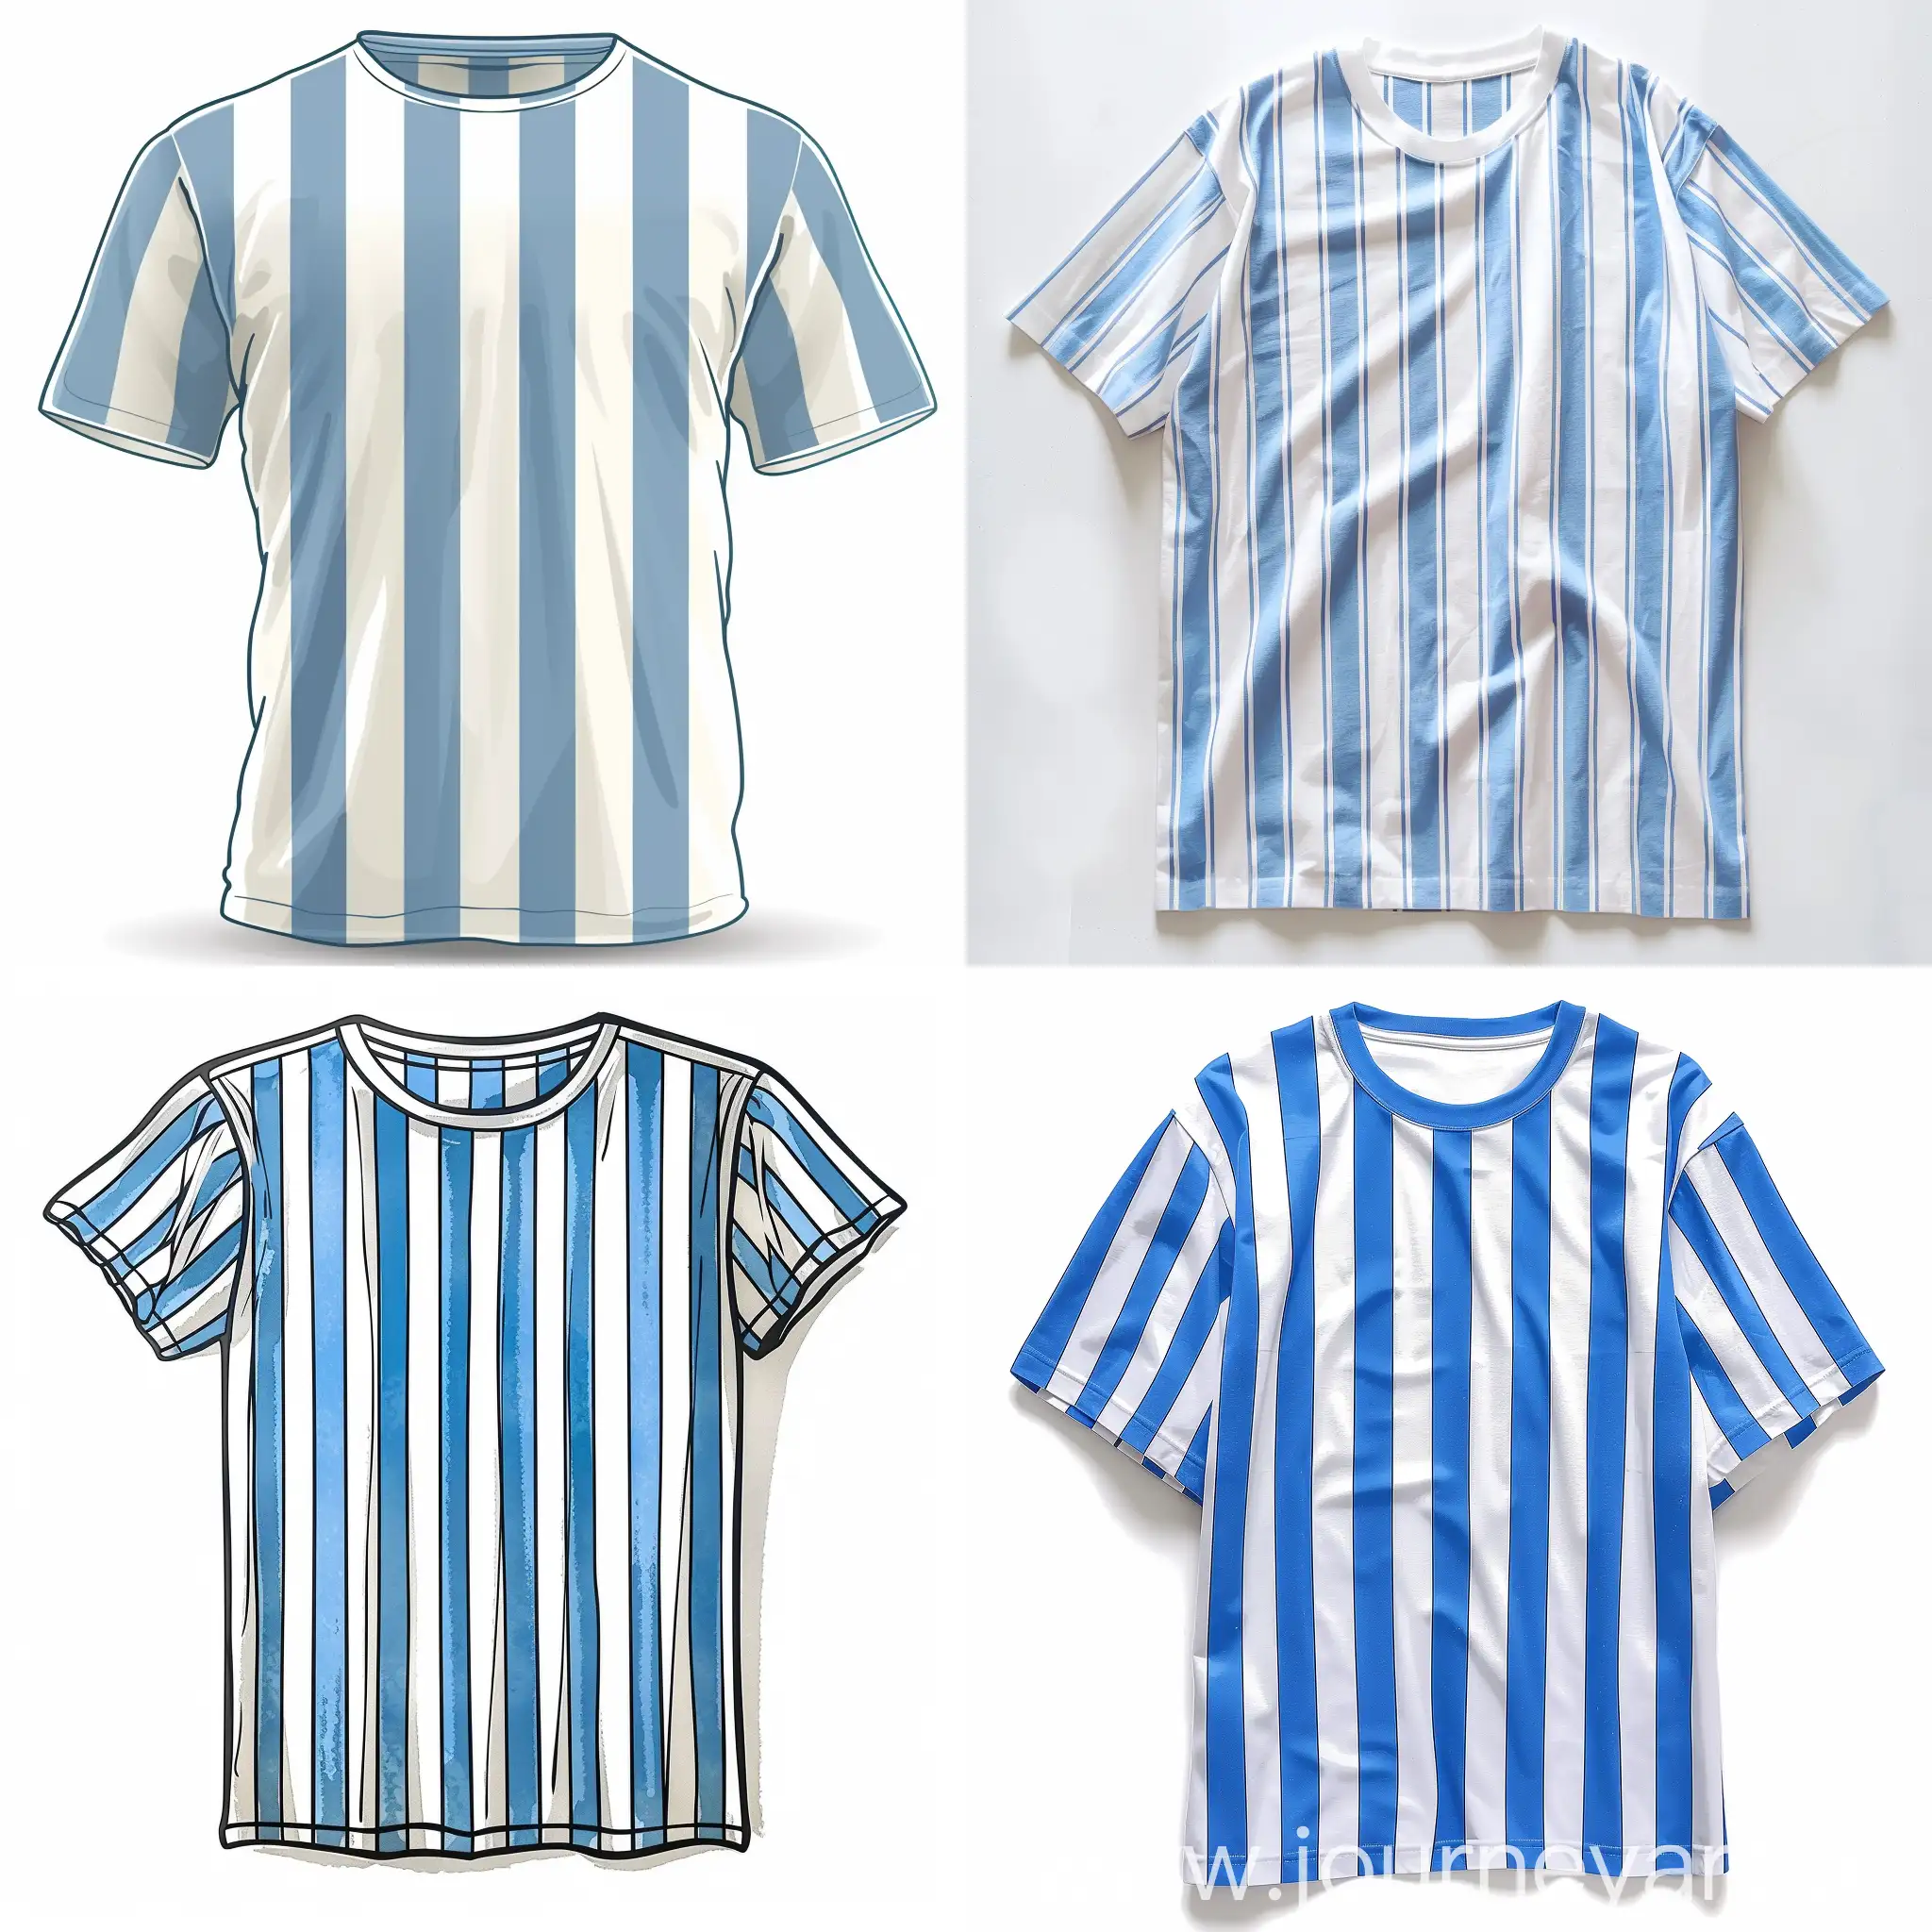 Chic-Vertical-Blue-and-White-Striped-Oversized-Tshirt-Illustration